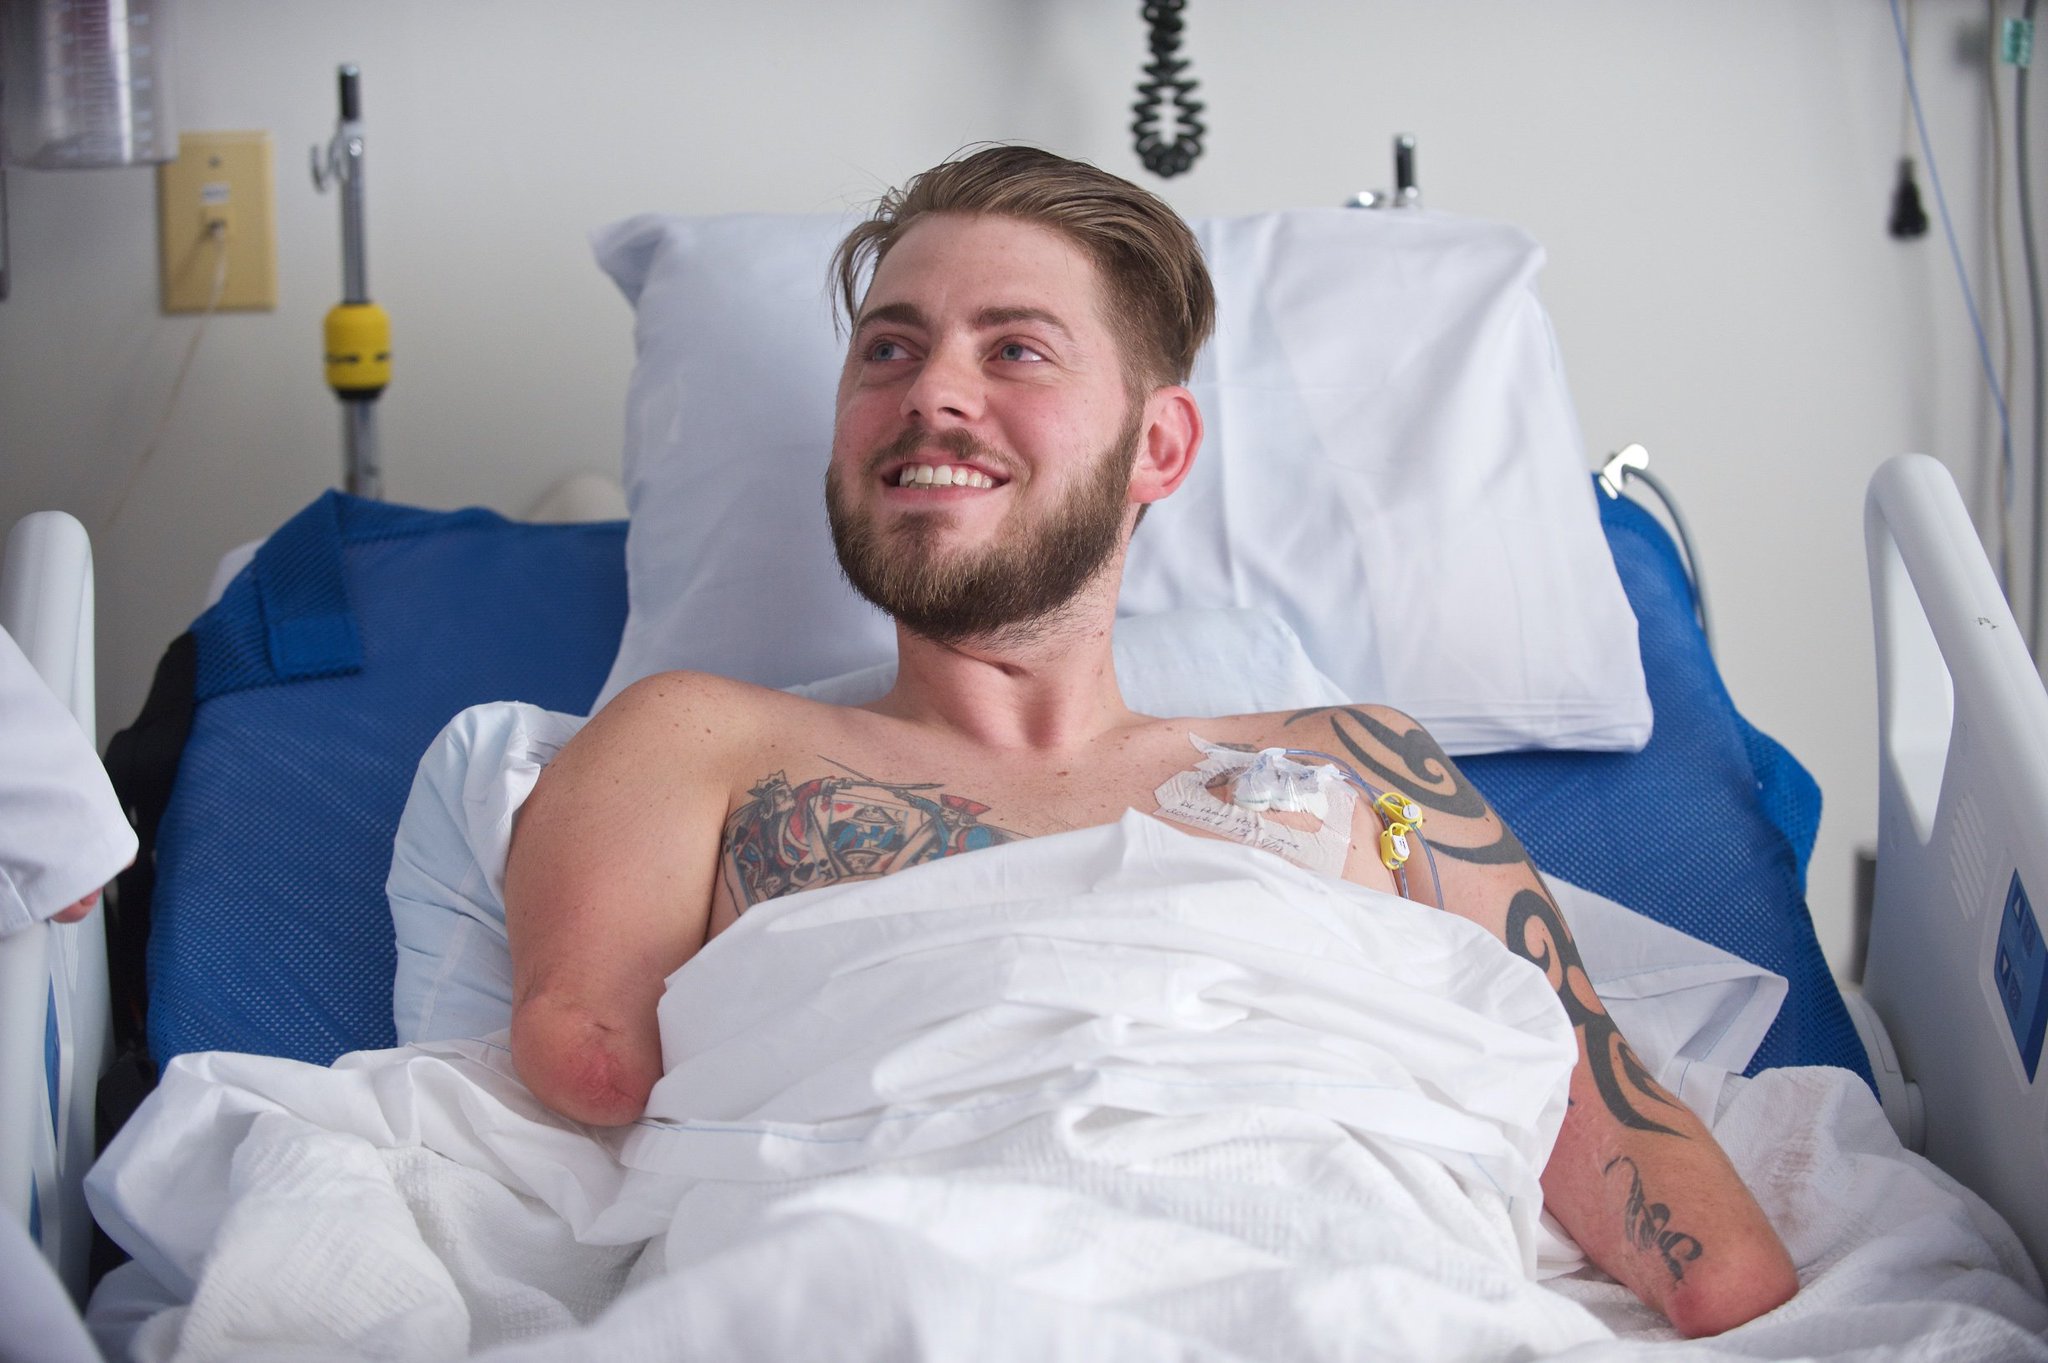 Retired USMC Sergeant John Peck eagerly awaits his bilateral arm transplant at BWH